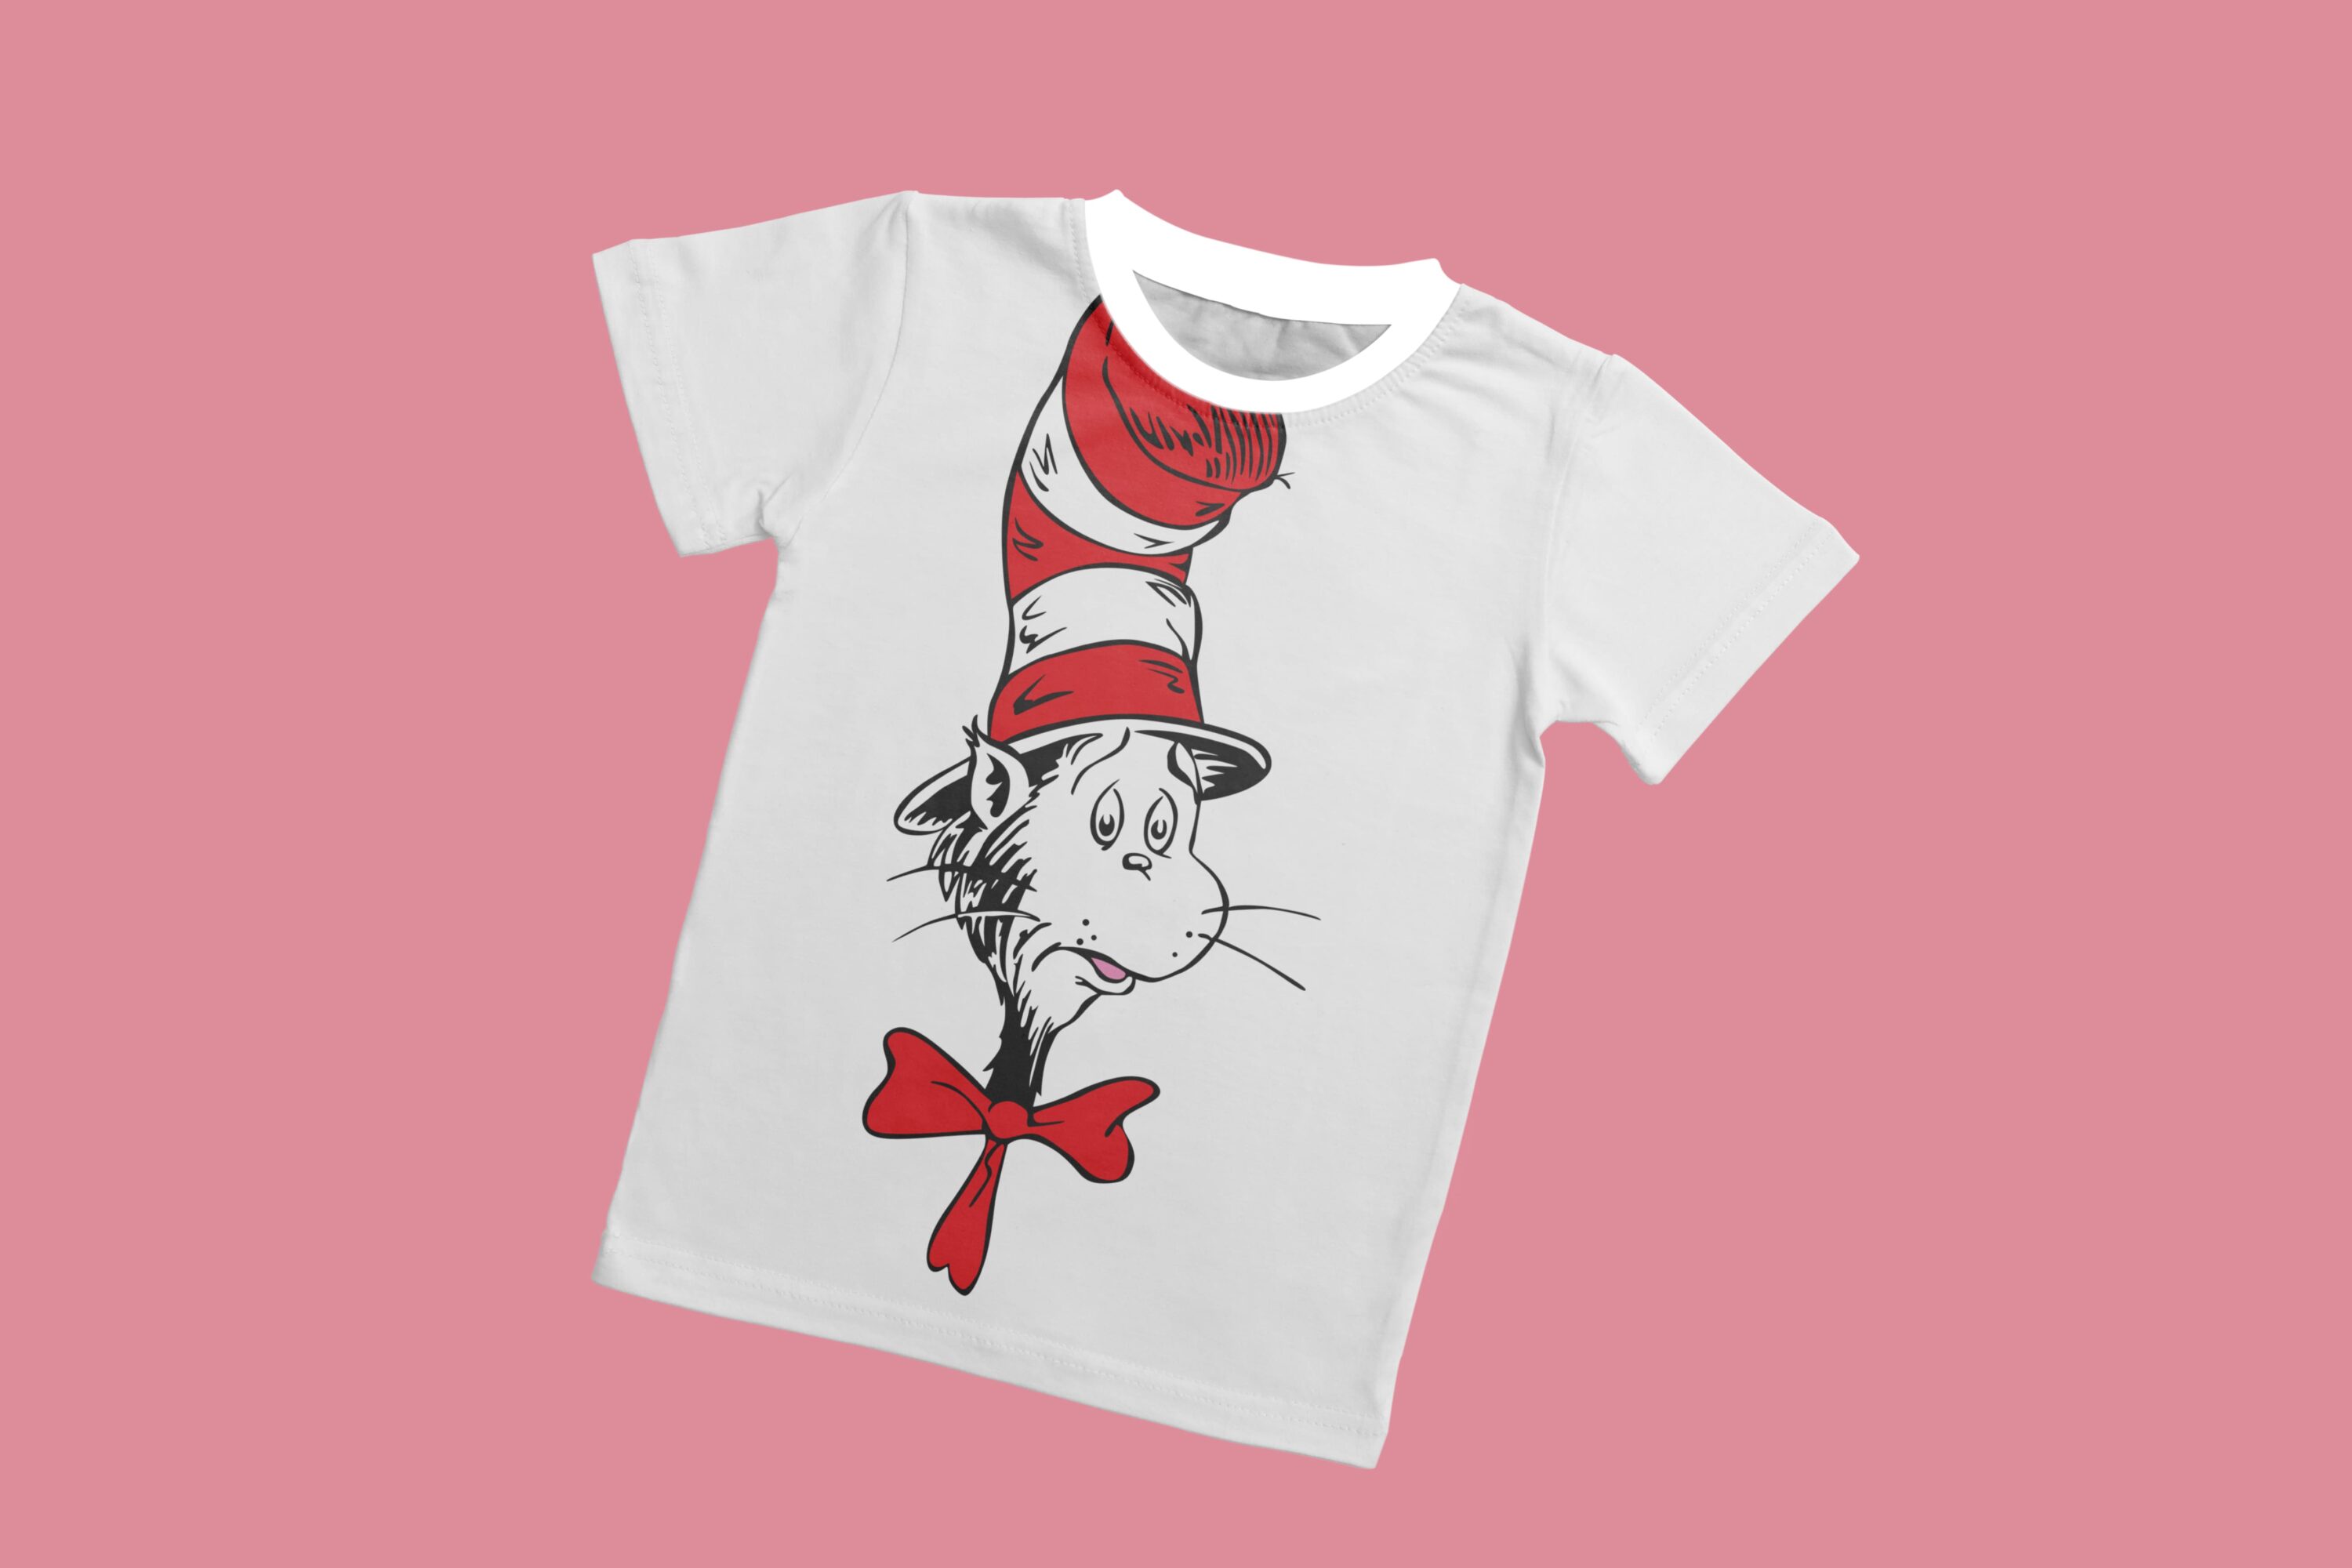 A gray T-shirt with a white collar and the face of a sad cat with a red bow in a red and white hat.